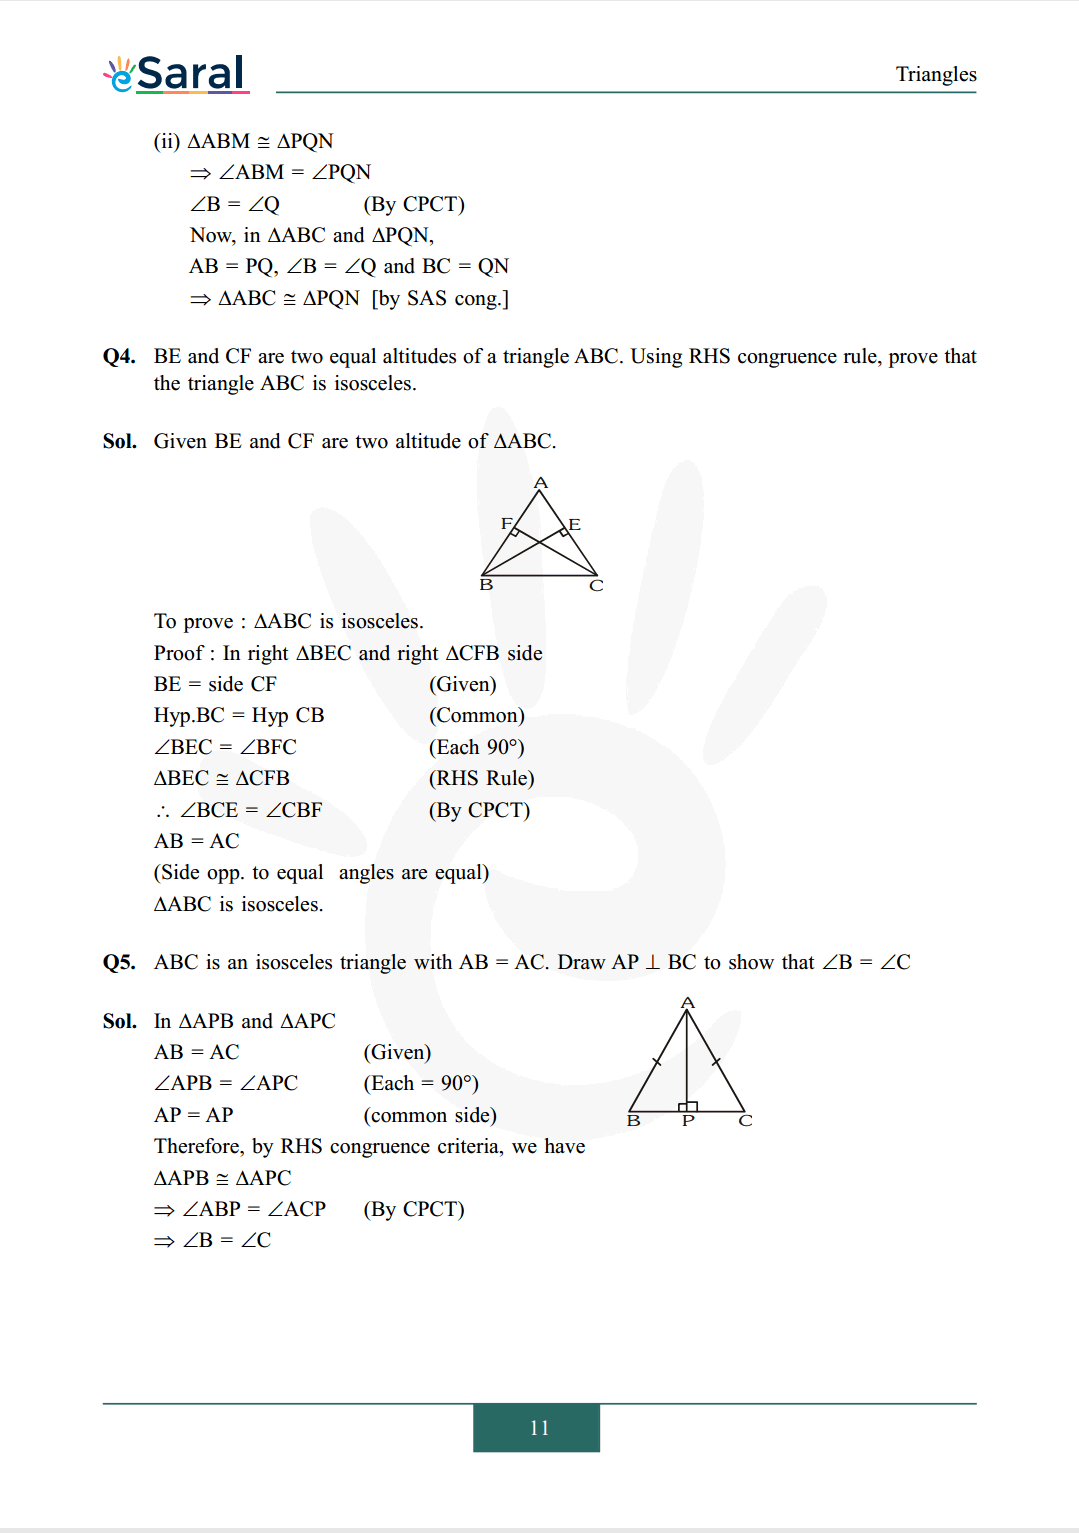 Class 9 maths chapter 7 exercise 7.3 solutions Image 3